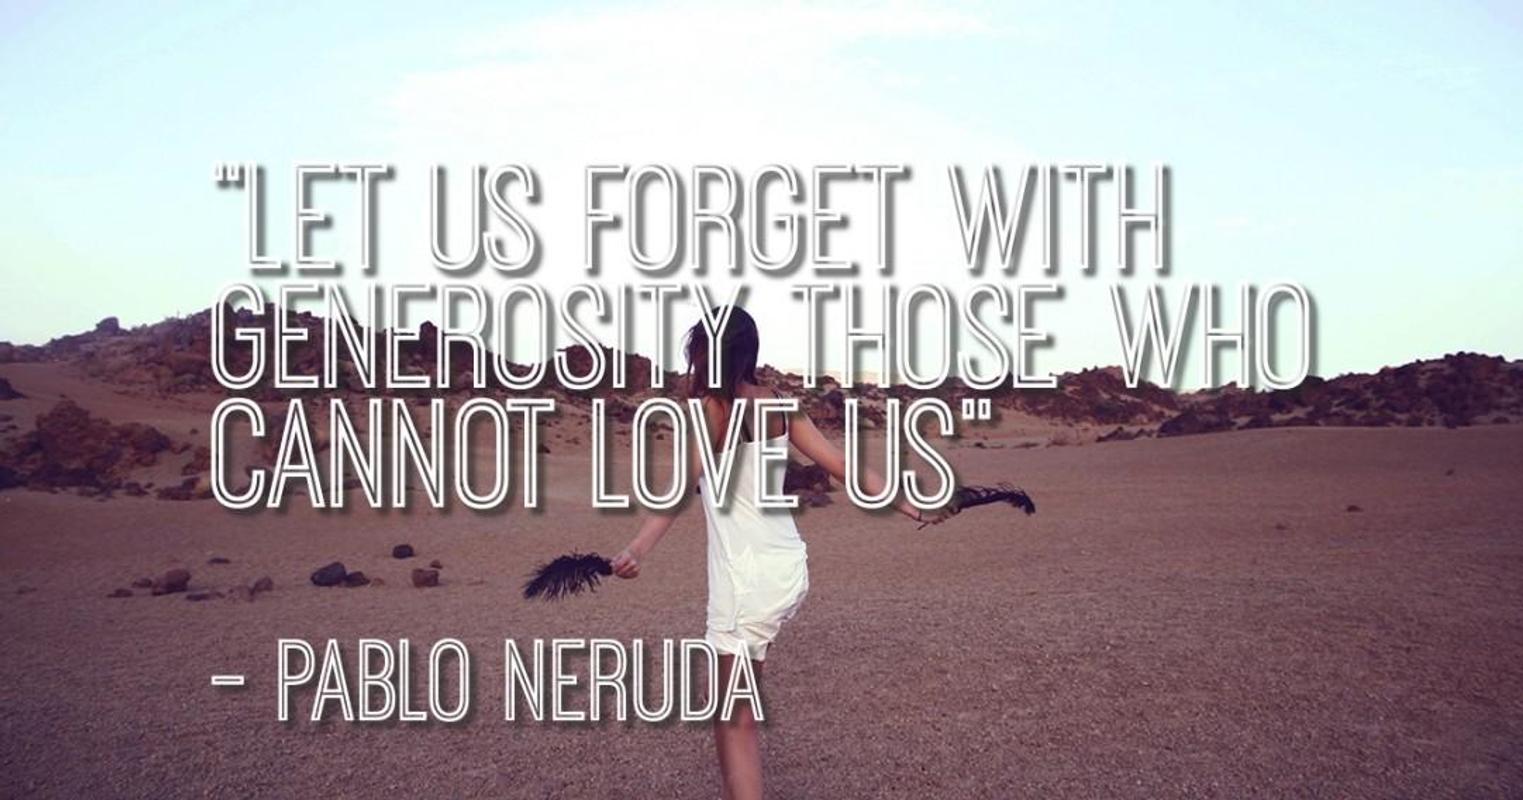 Pablo Neruda Quotes For Android Apk Download